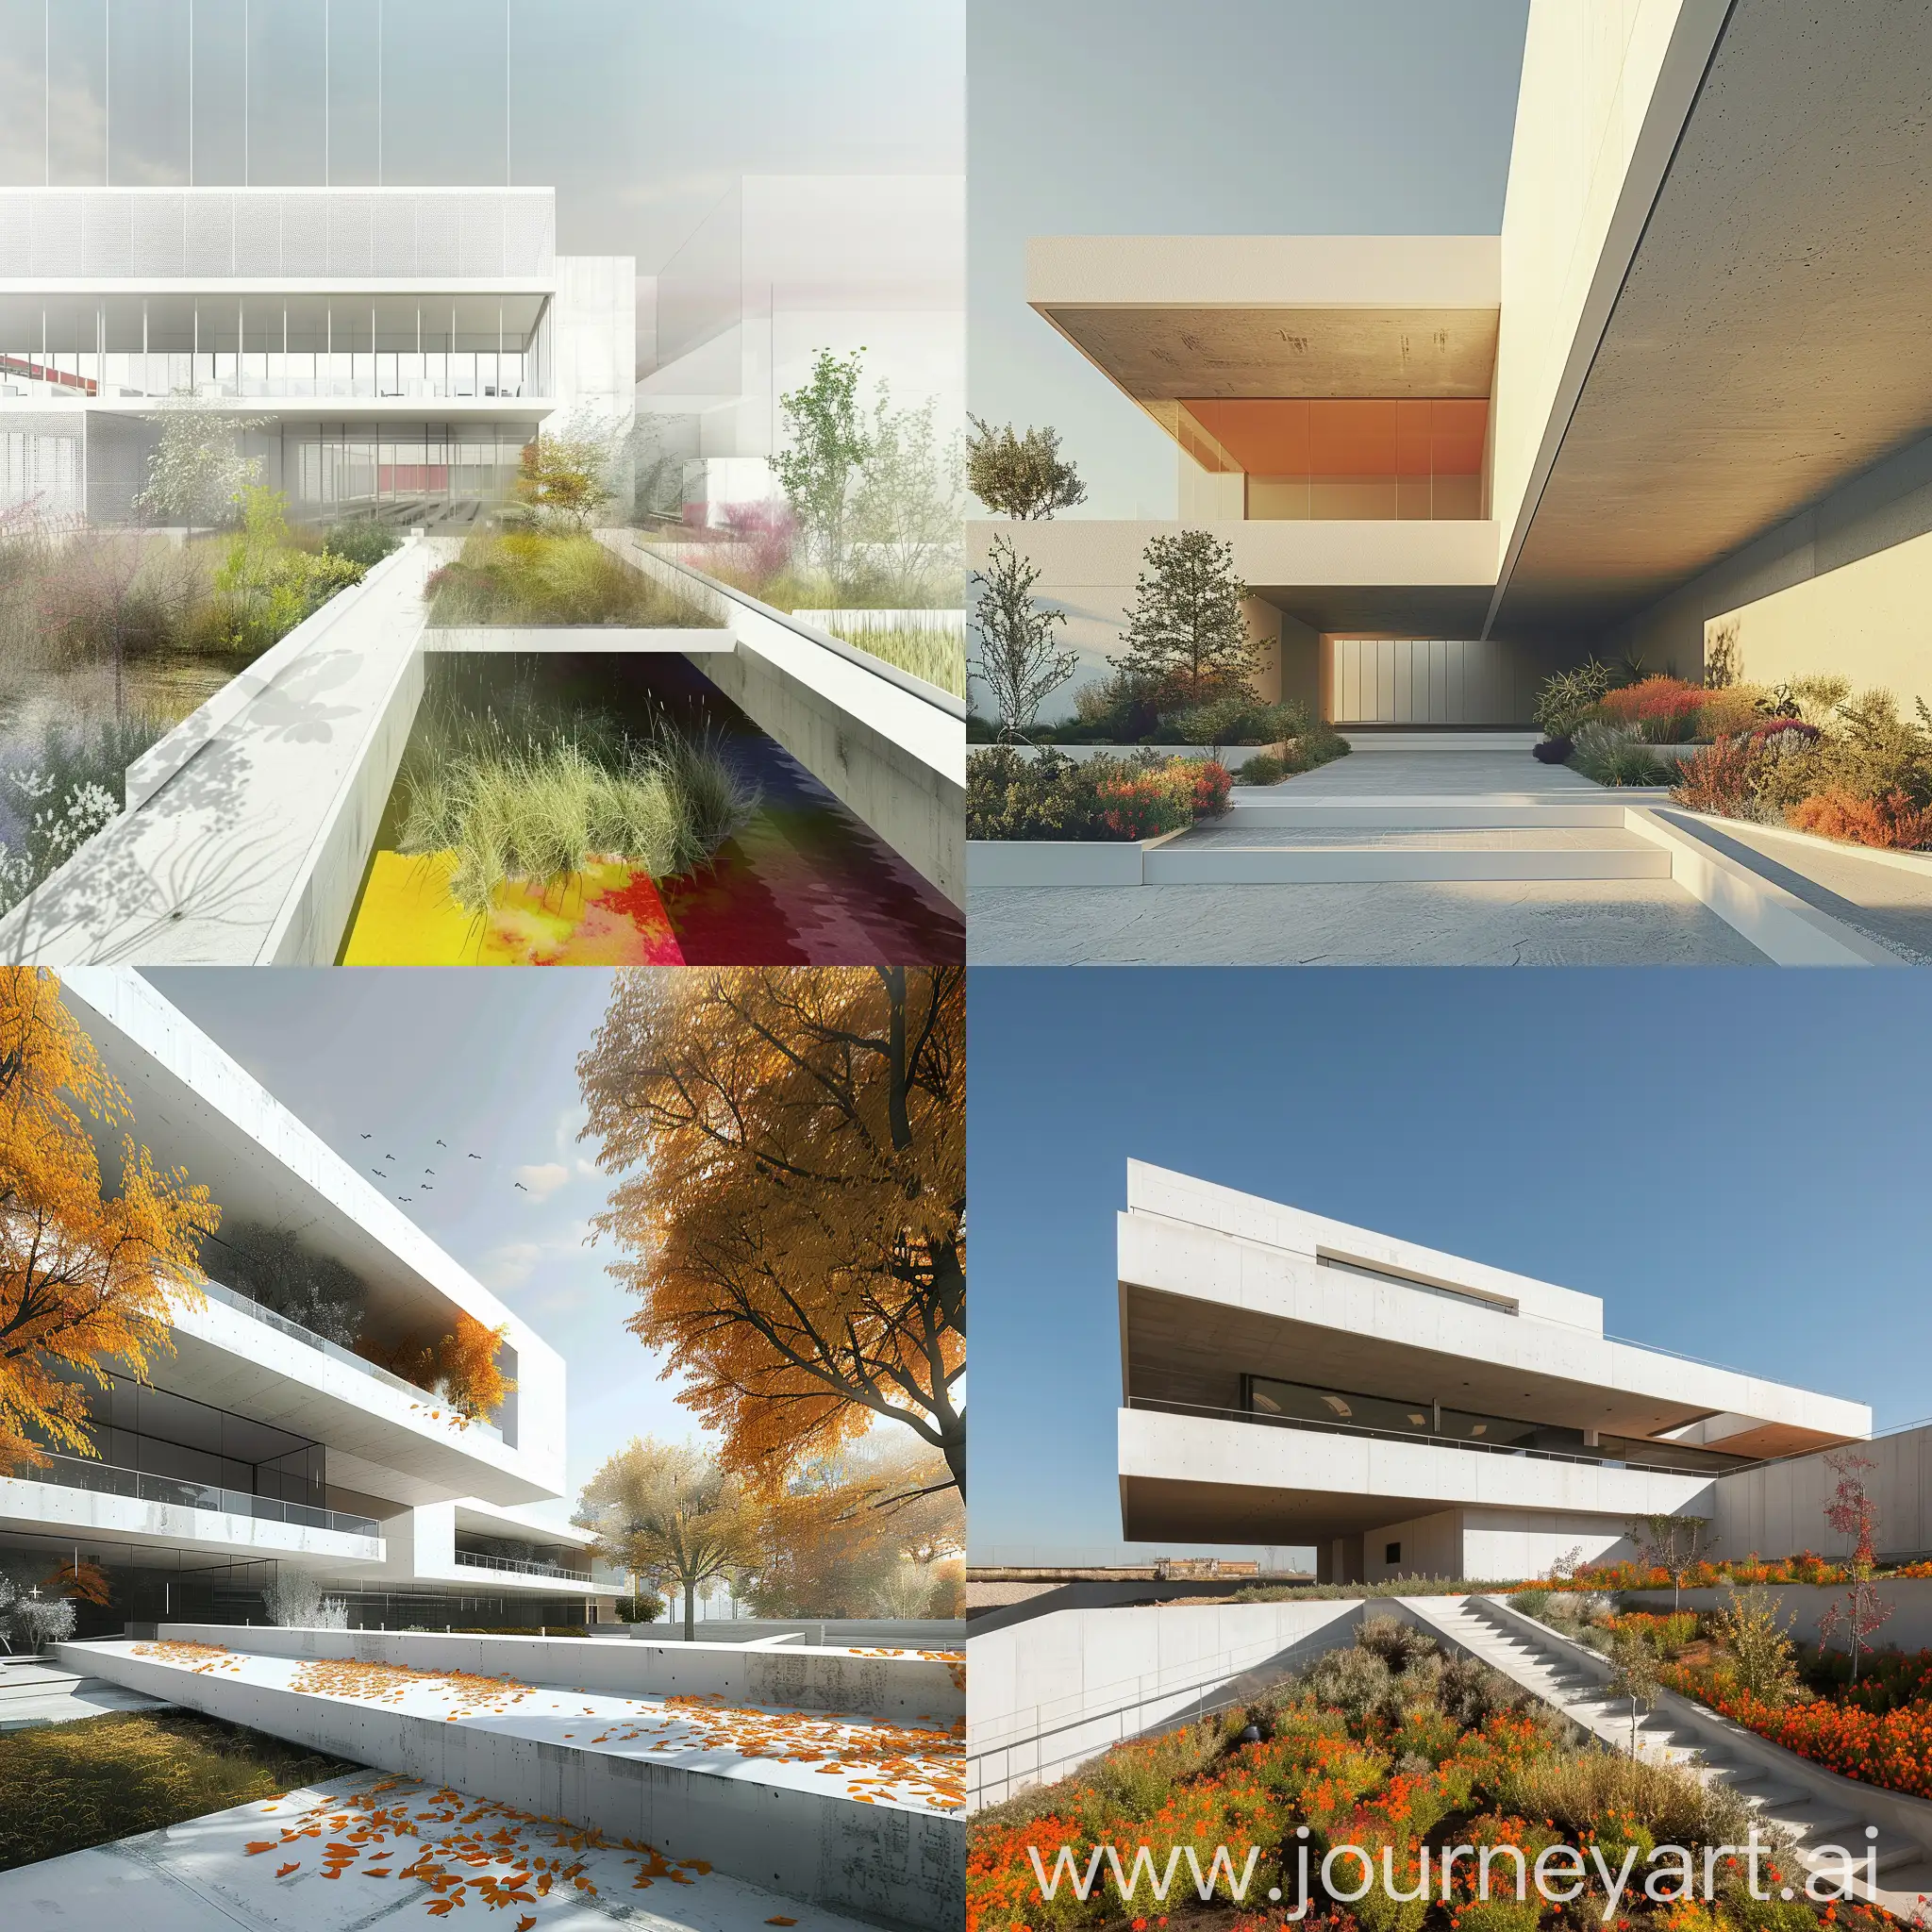 An external architectural block for a plant research center, two floors, an underground floor and an above-ground floor, modern style, white concrete. Colors can be used to derive solar energy.